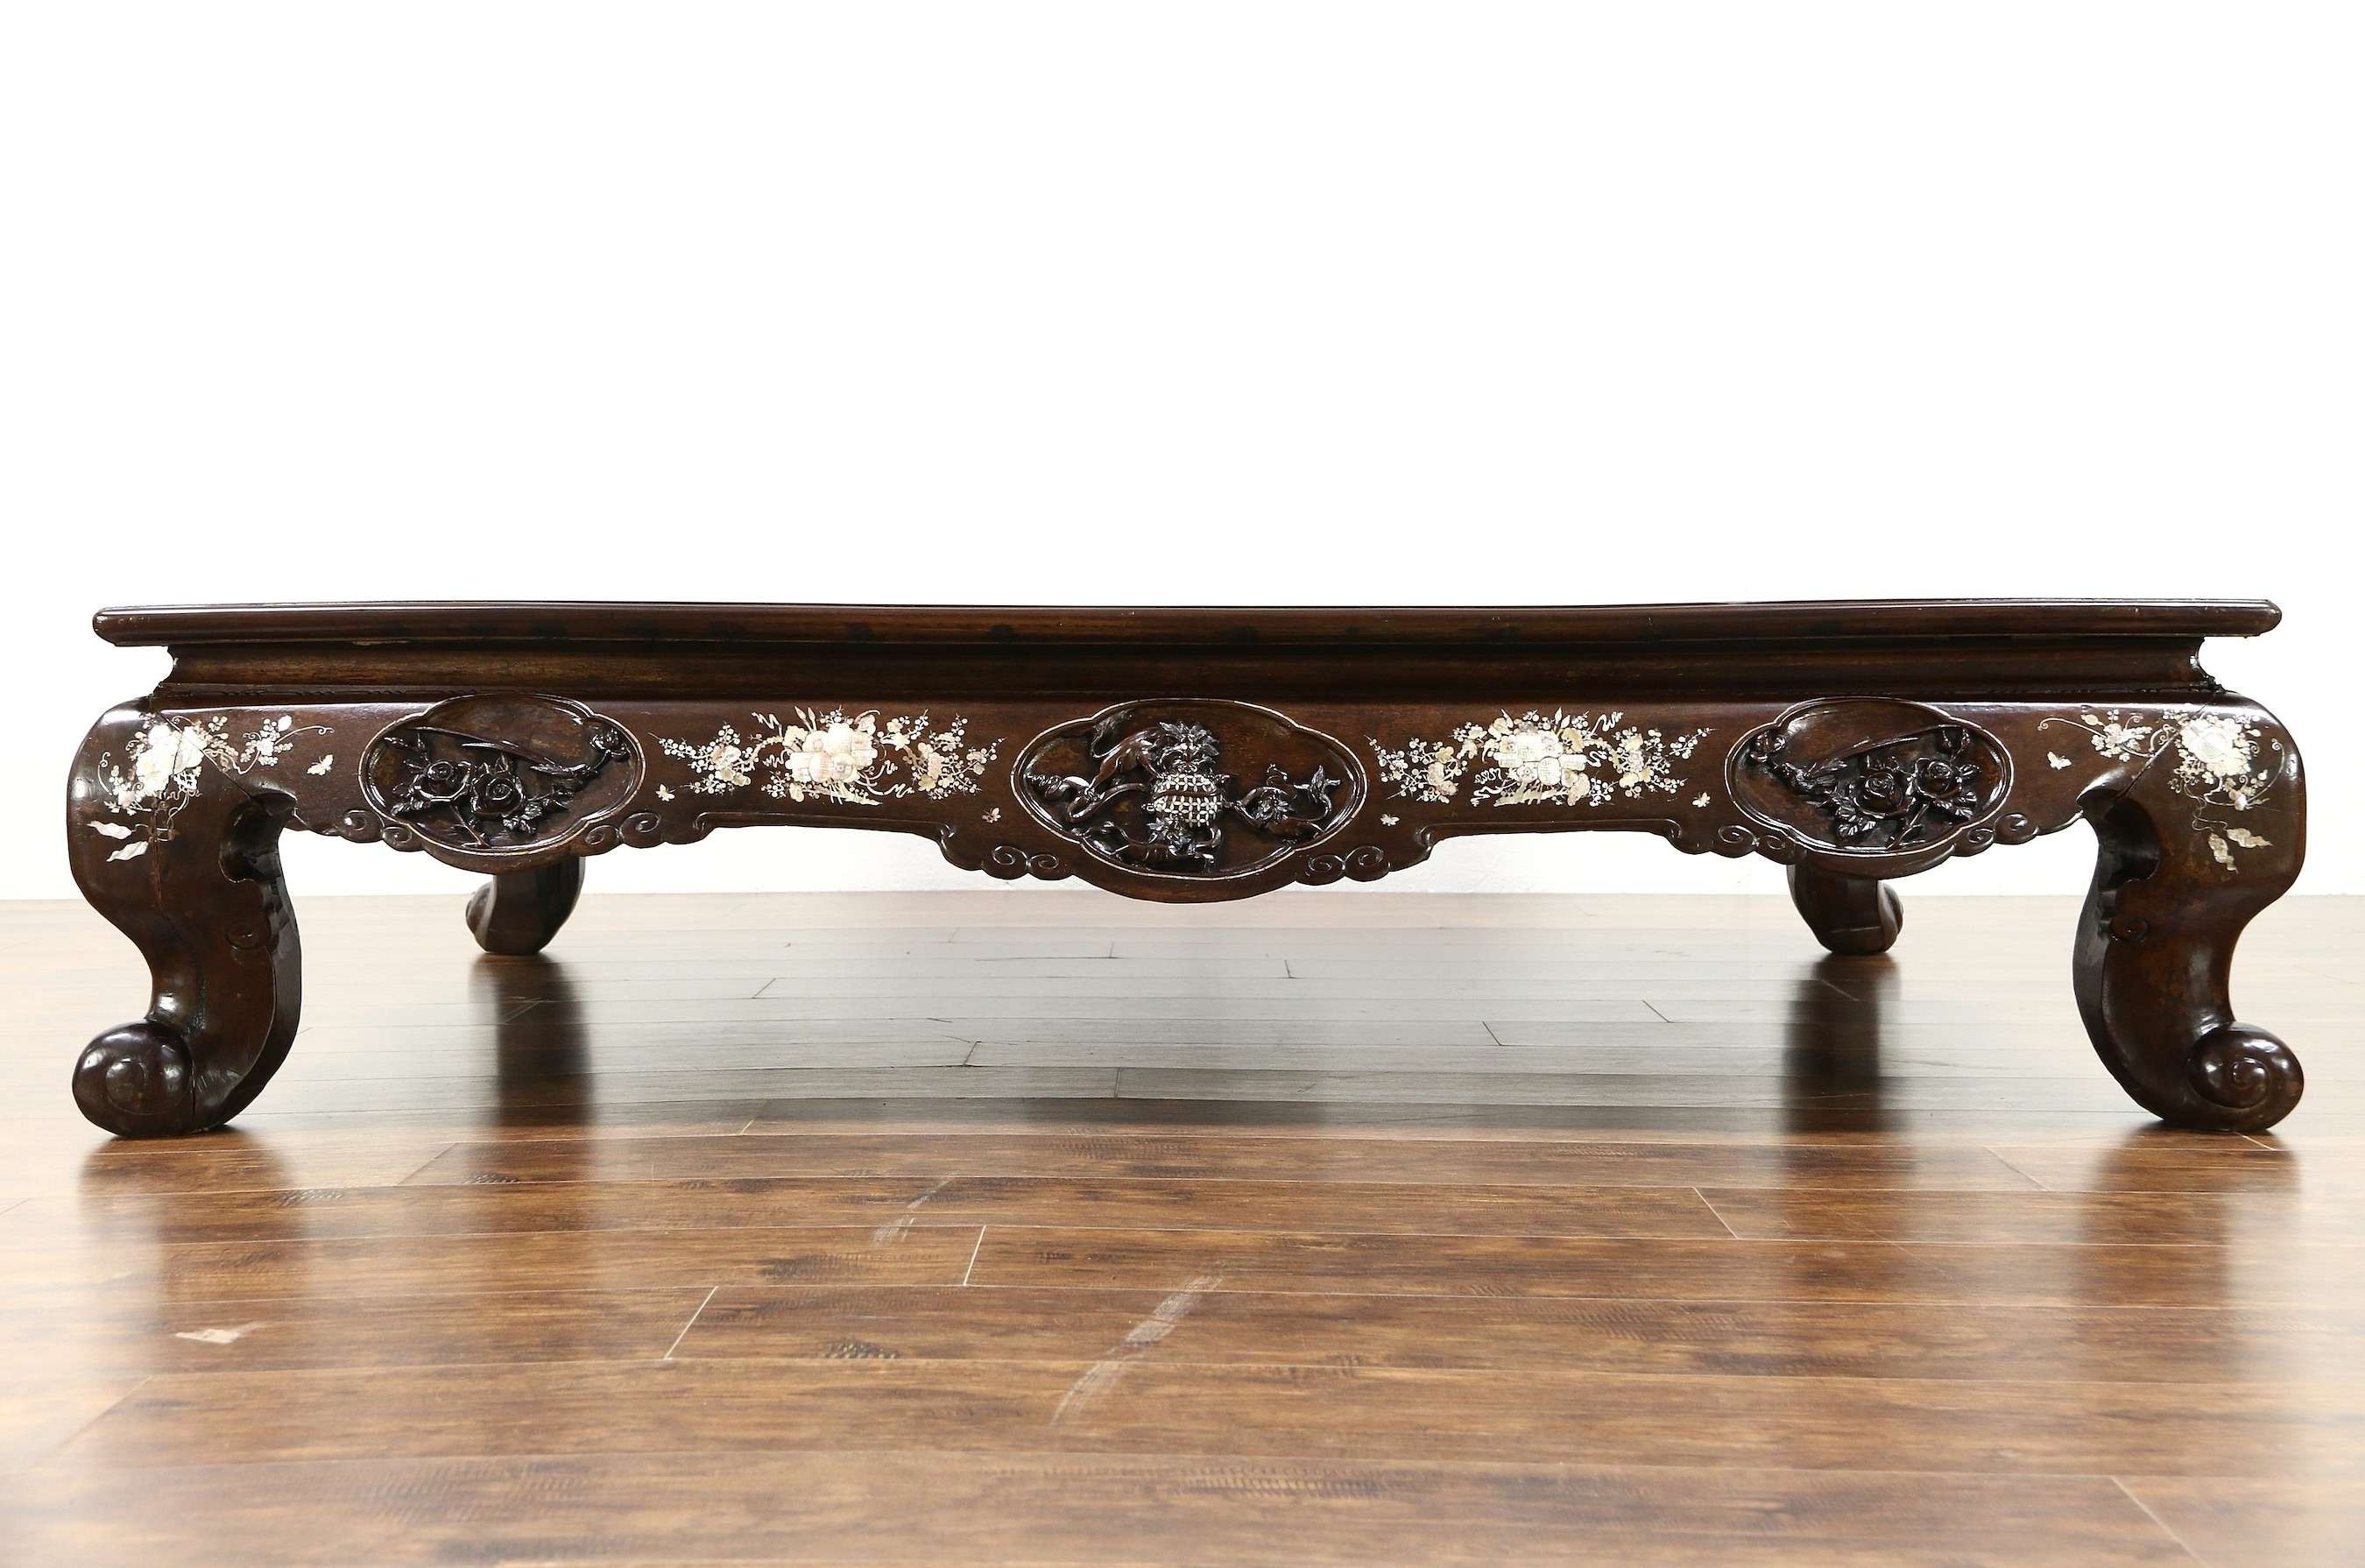 Chinese Rosewood 1860 Antique Low Banquet Dining Or Coffee Table Intended For Fashionable Chinese Coffee Tables (View 4 of 20)